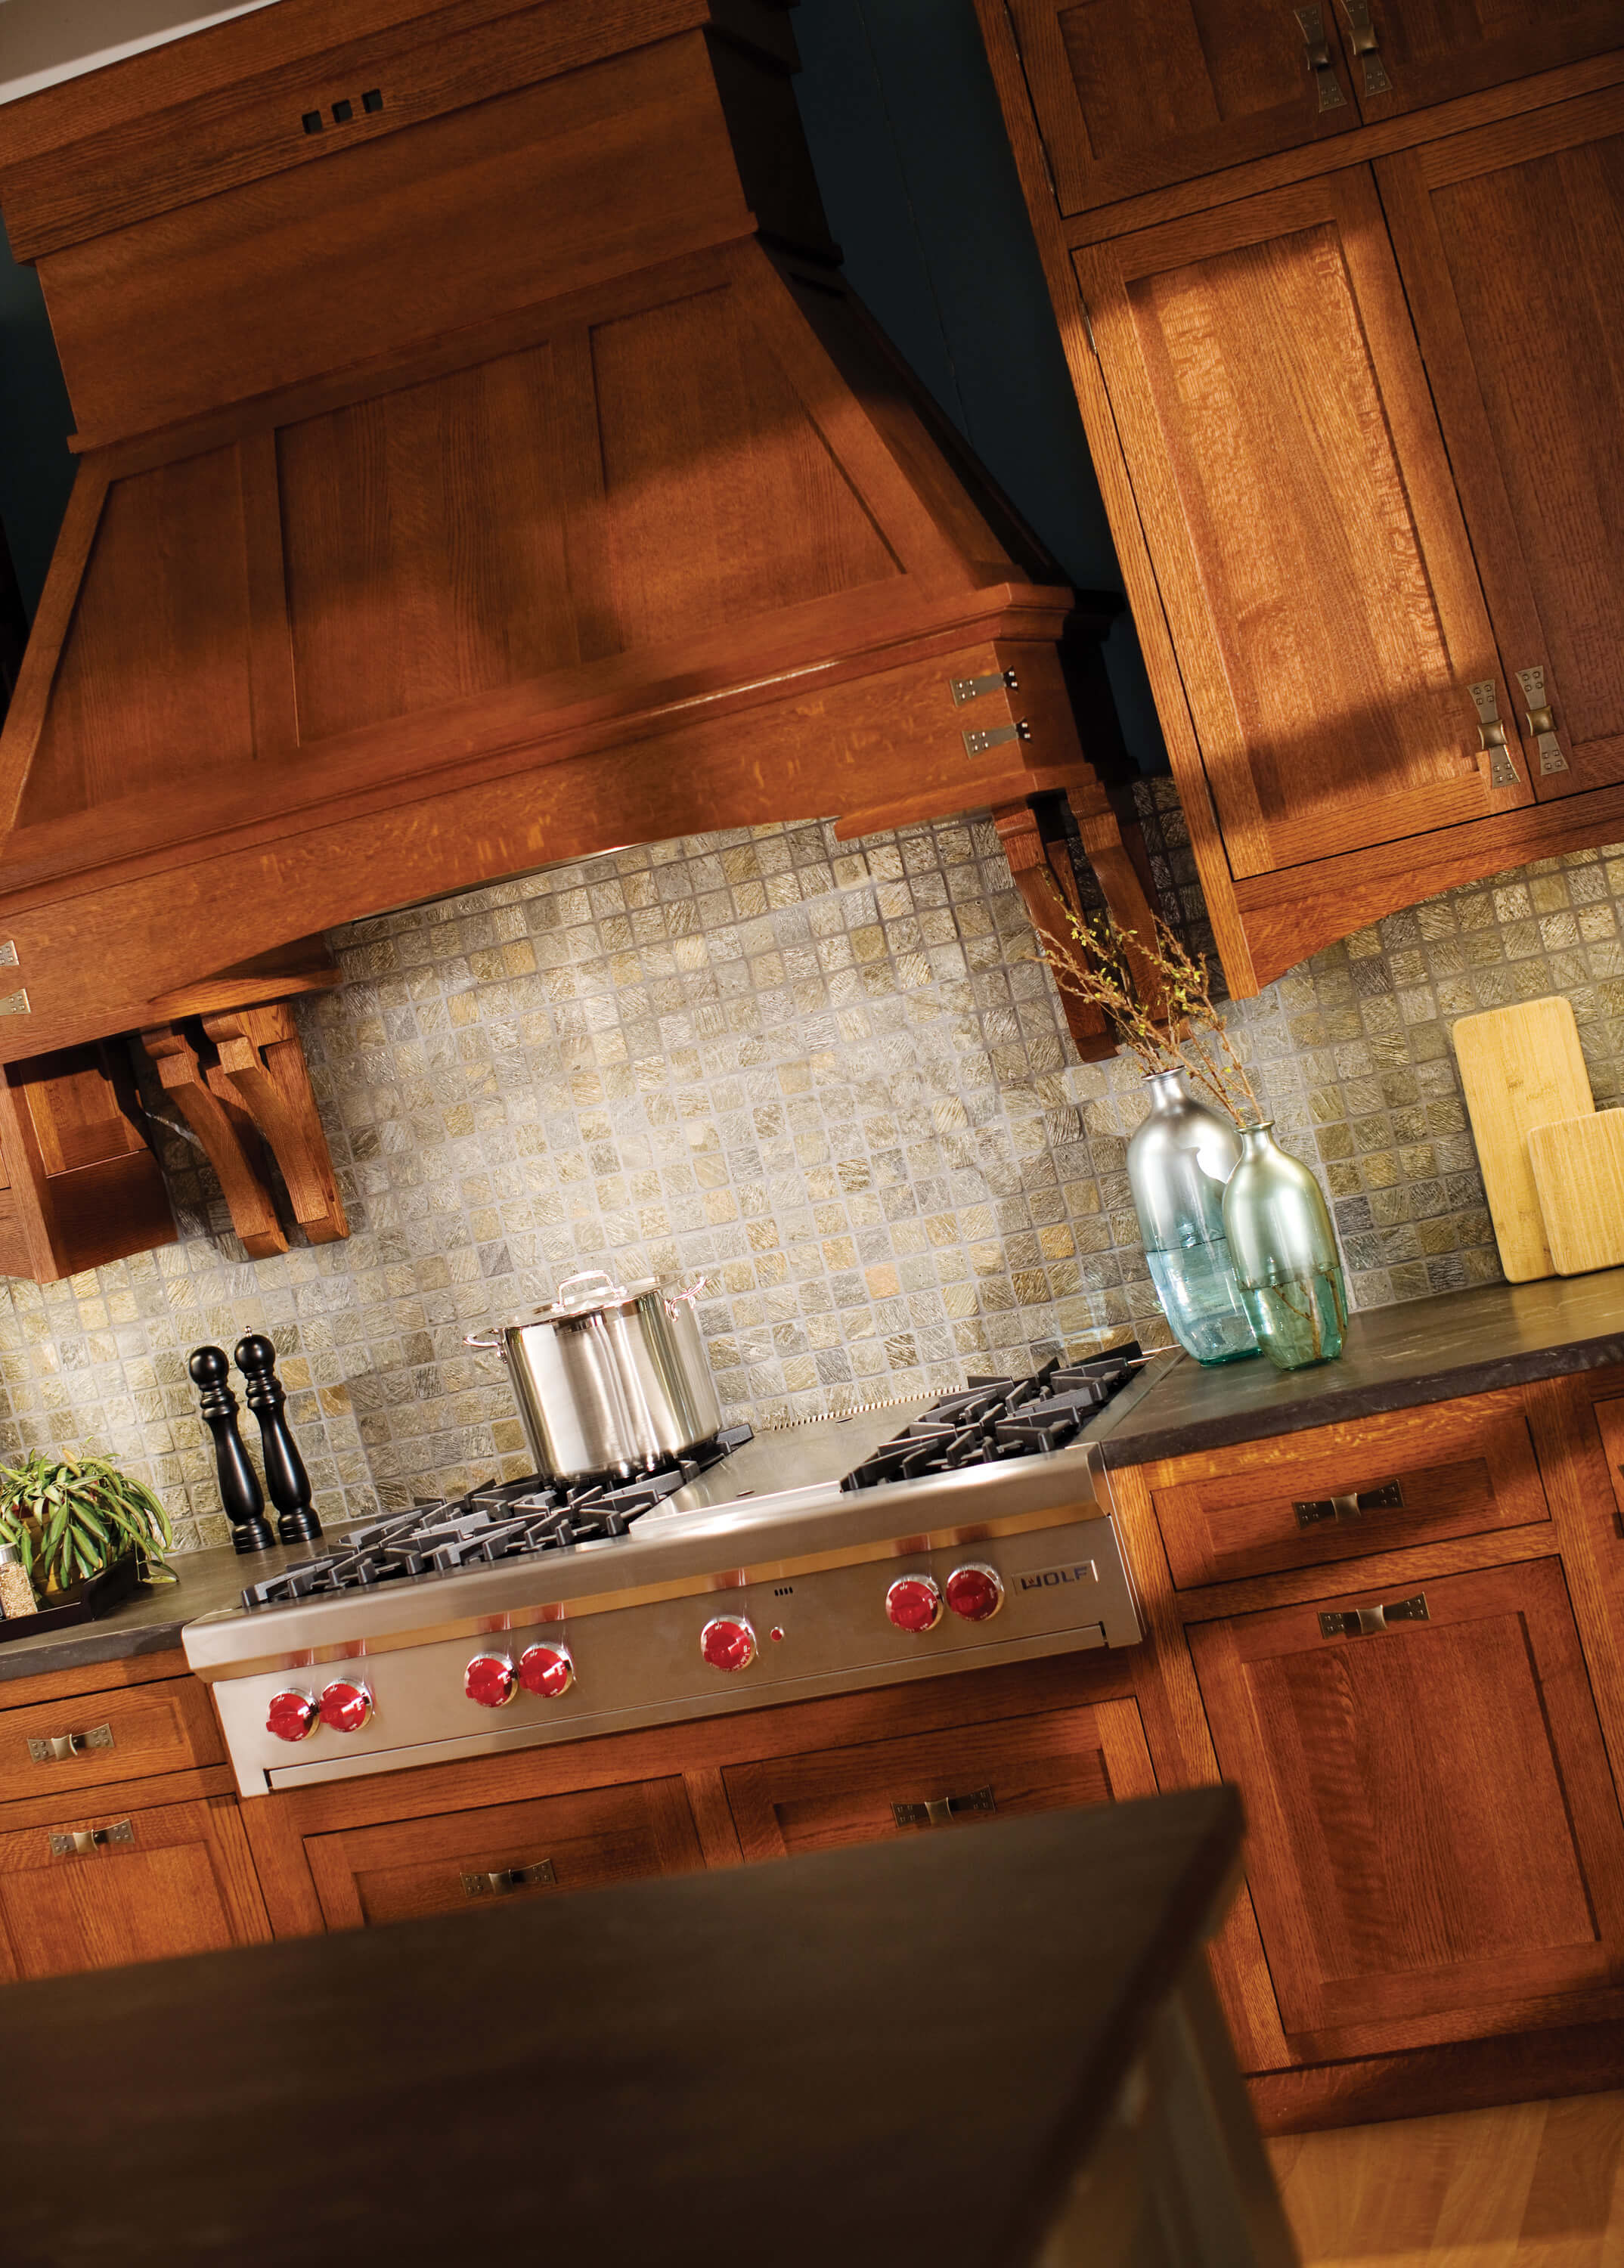 Wood hoods add a true hand-crafted focal point to a Craftsman style kitchen design.